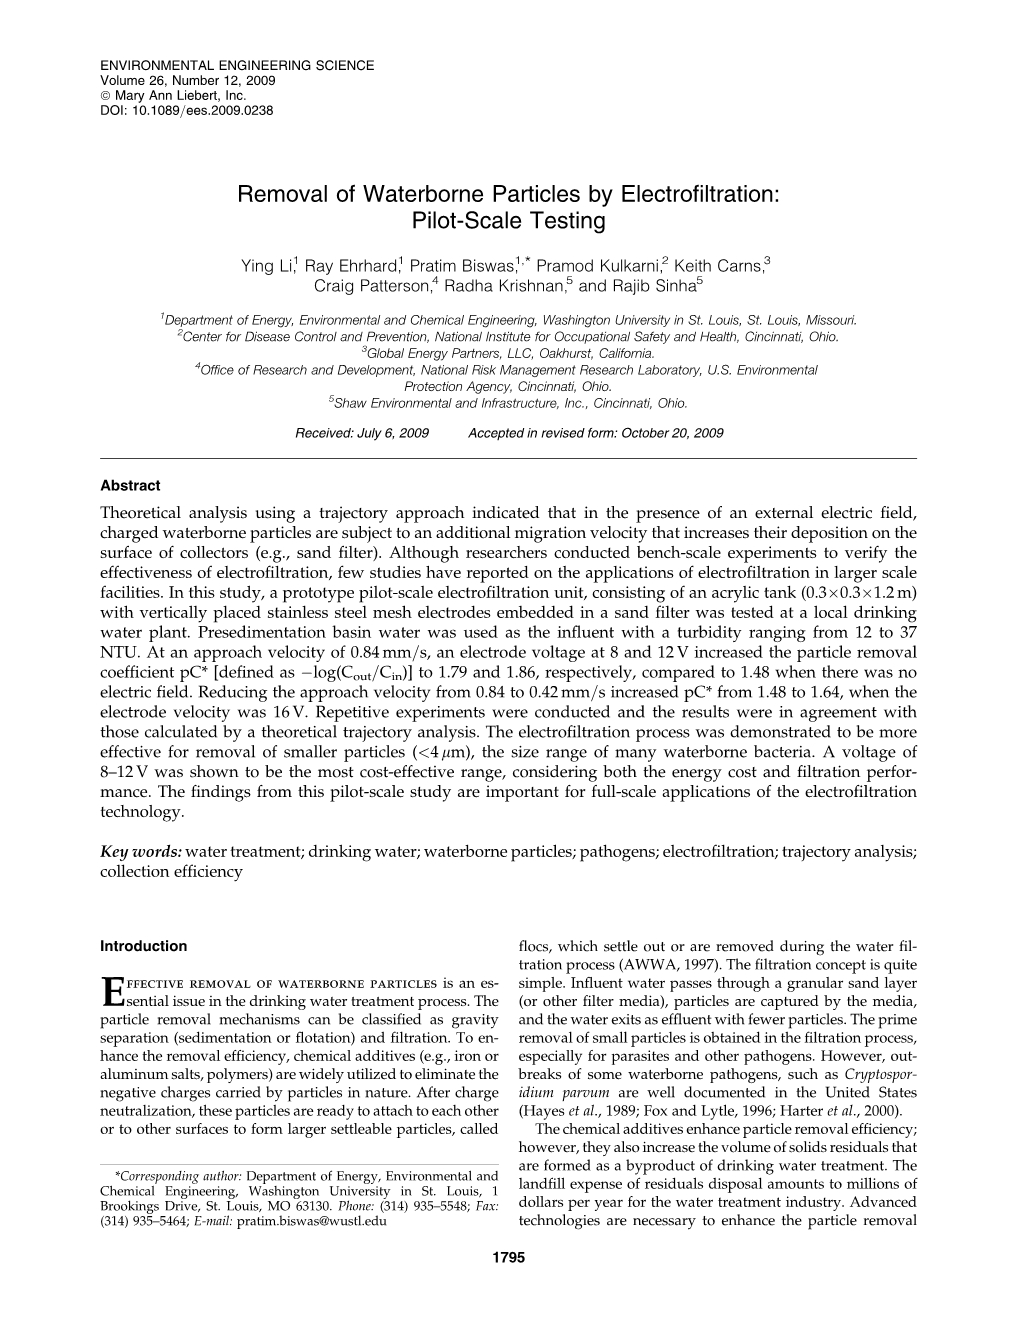 Removal of Waterborne Particles by Electrofiltration: Pilot-Scale Testing